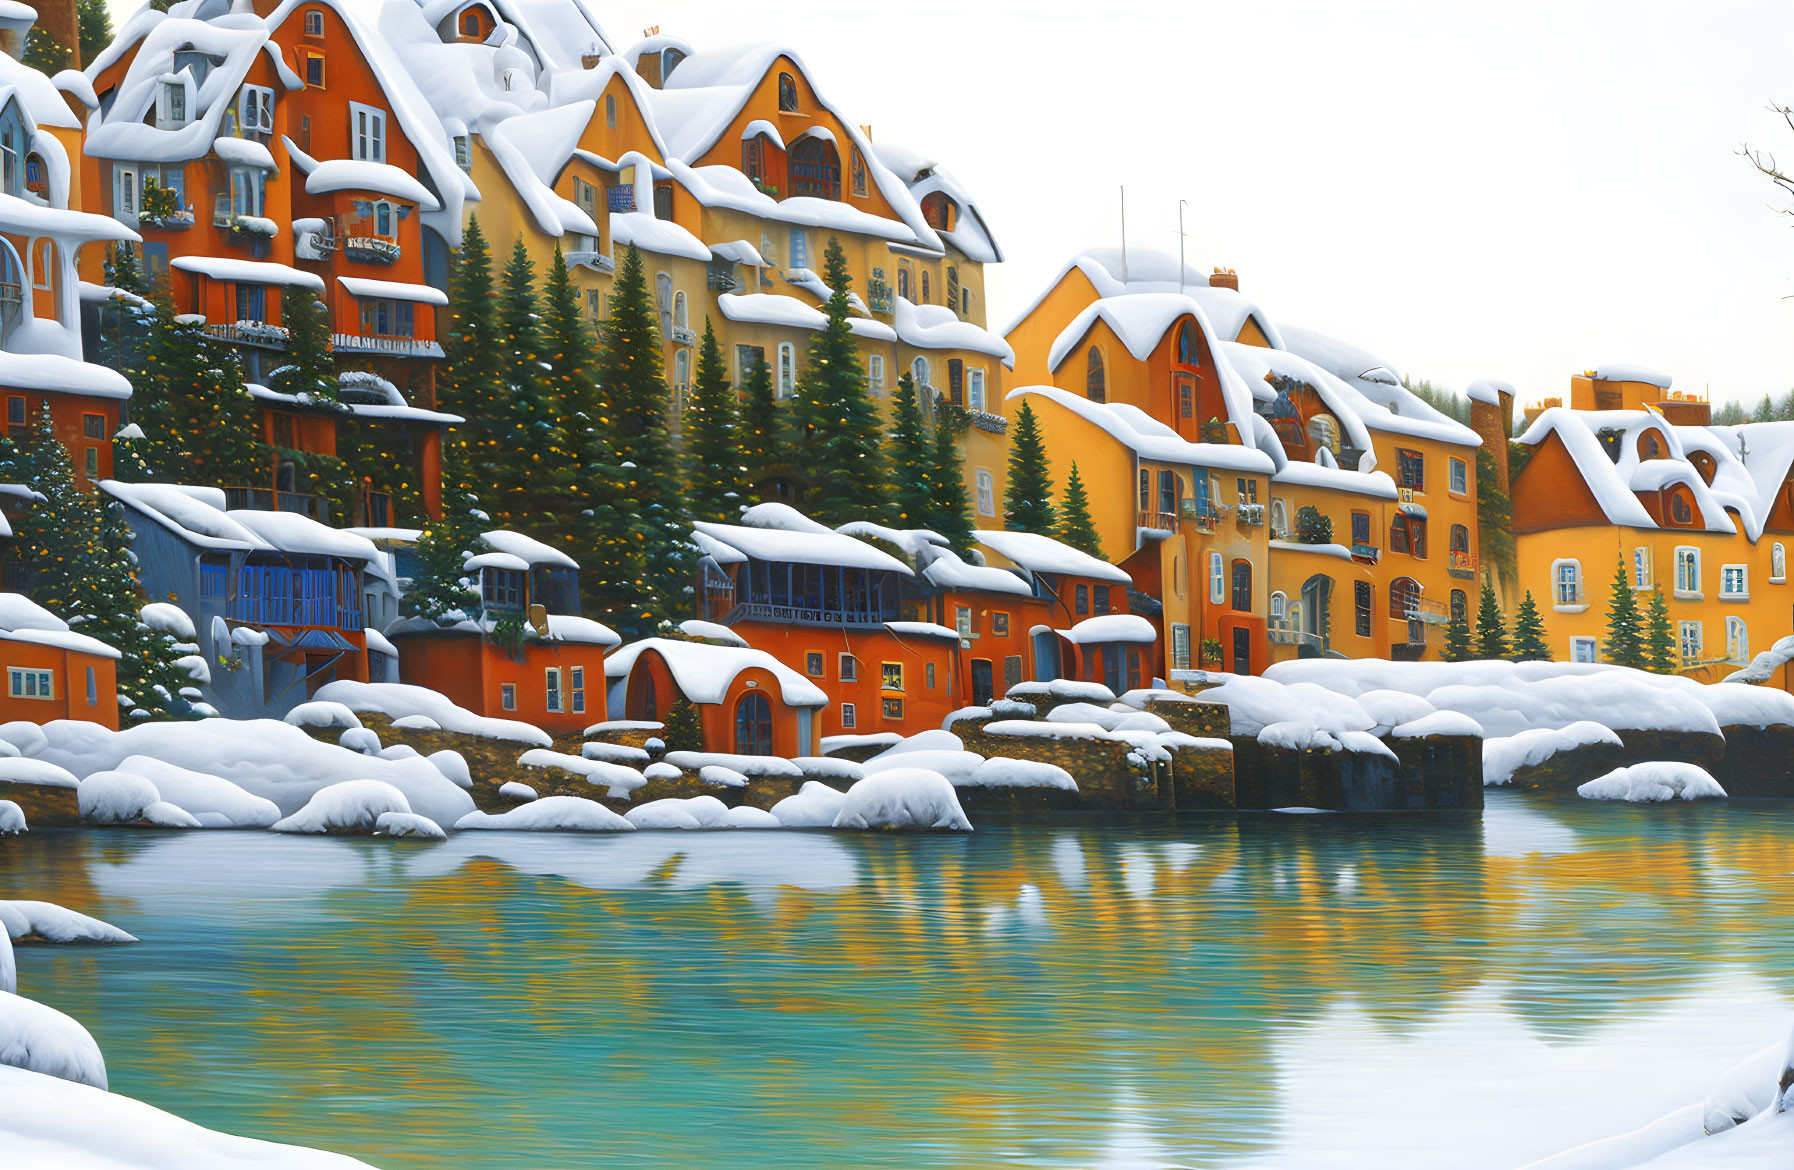 Snow-covered alpine buildings by frozen lake in winter landscape